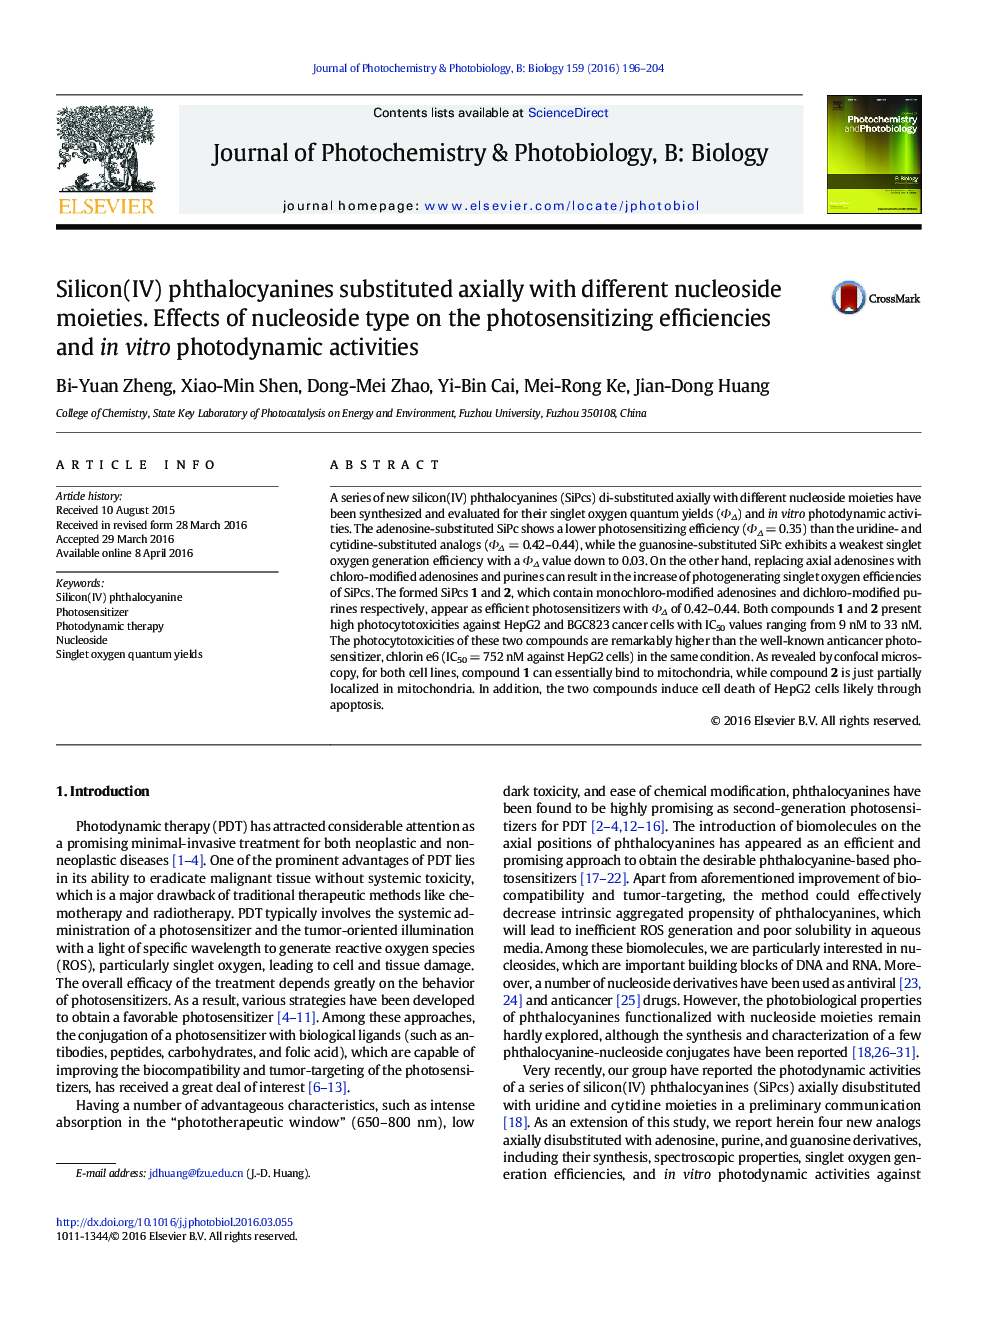 Silicon(IV) phthalocyanines substituted axially with different nucleoside moieties. Effects of nucleoside type on the photosensitizing efficiencies and in vitro photodynamic activities